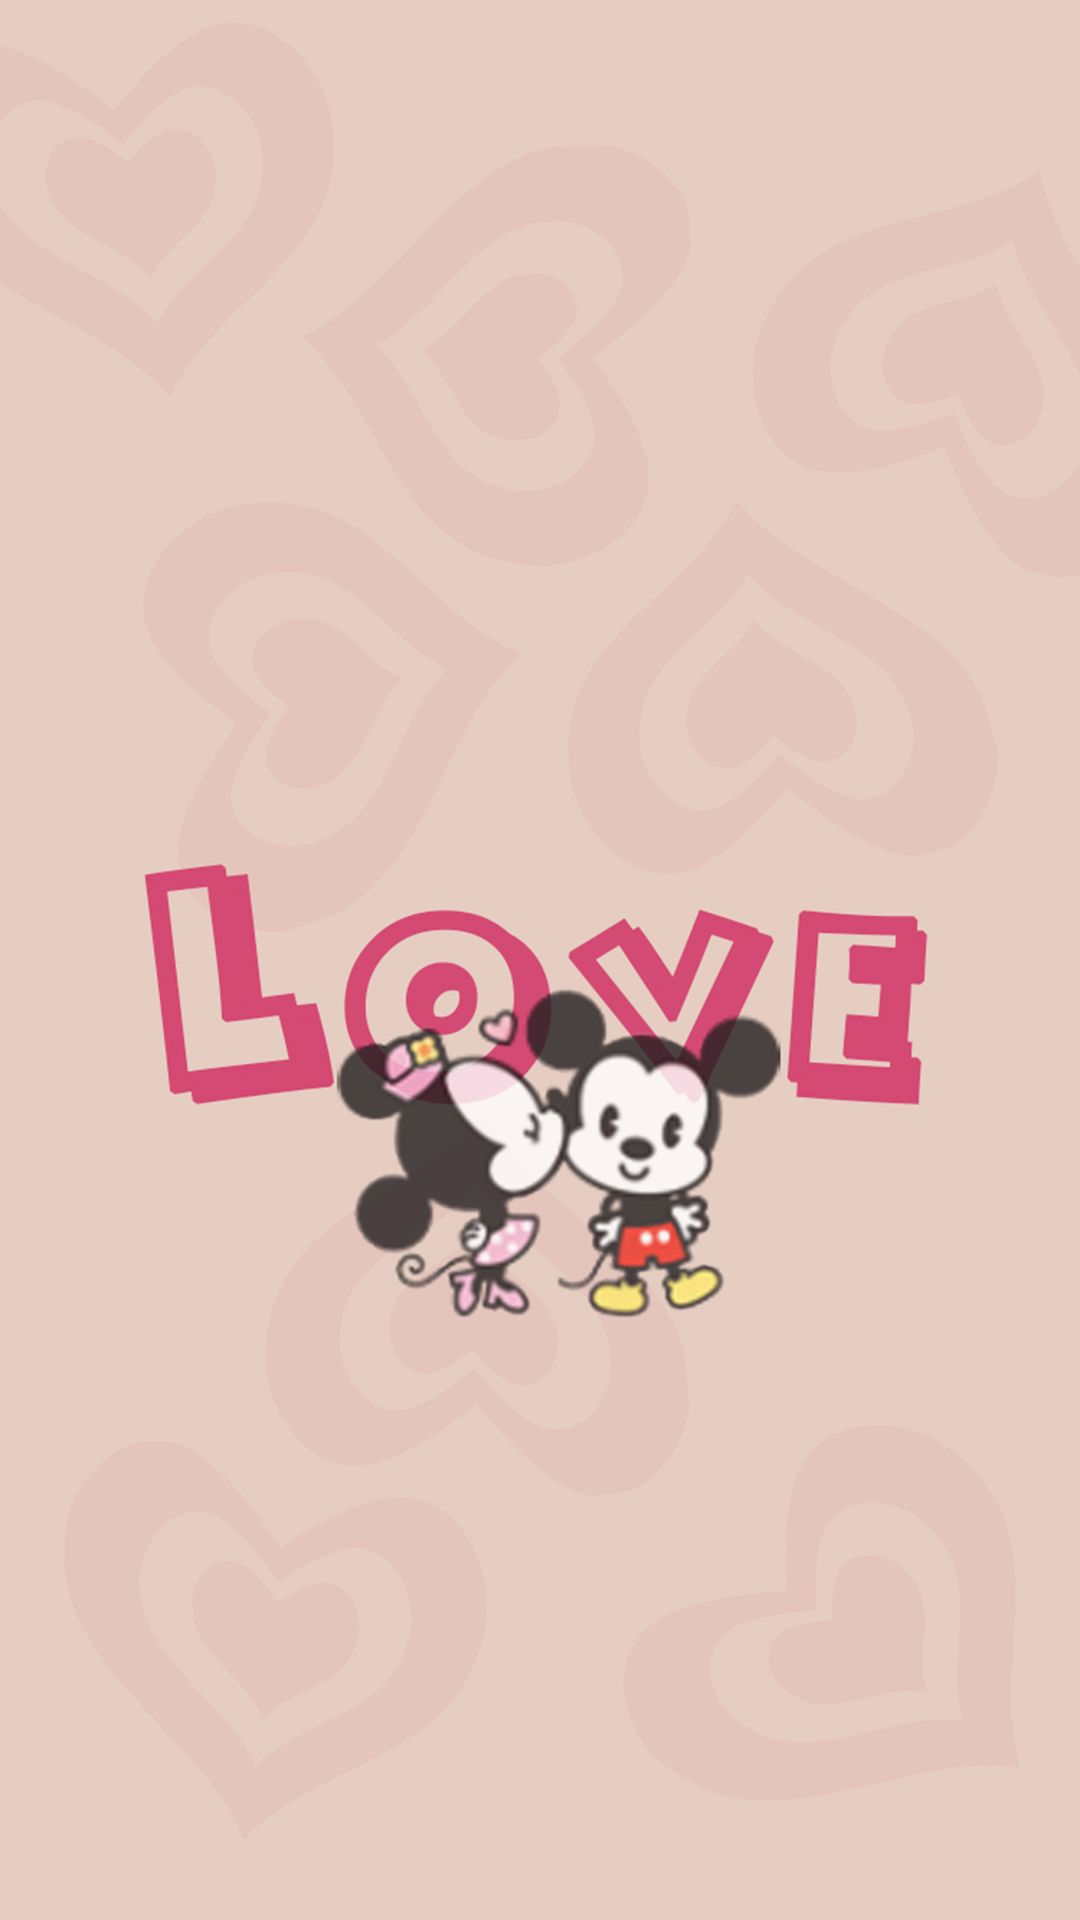 Free Mickey Mouse Minnie Mouse The Walt Disney Company Wallpaper  Mickey  Mouse decoration  nohatcc